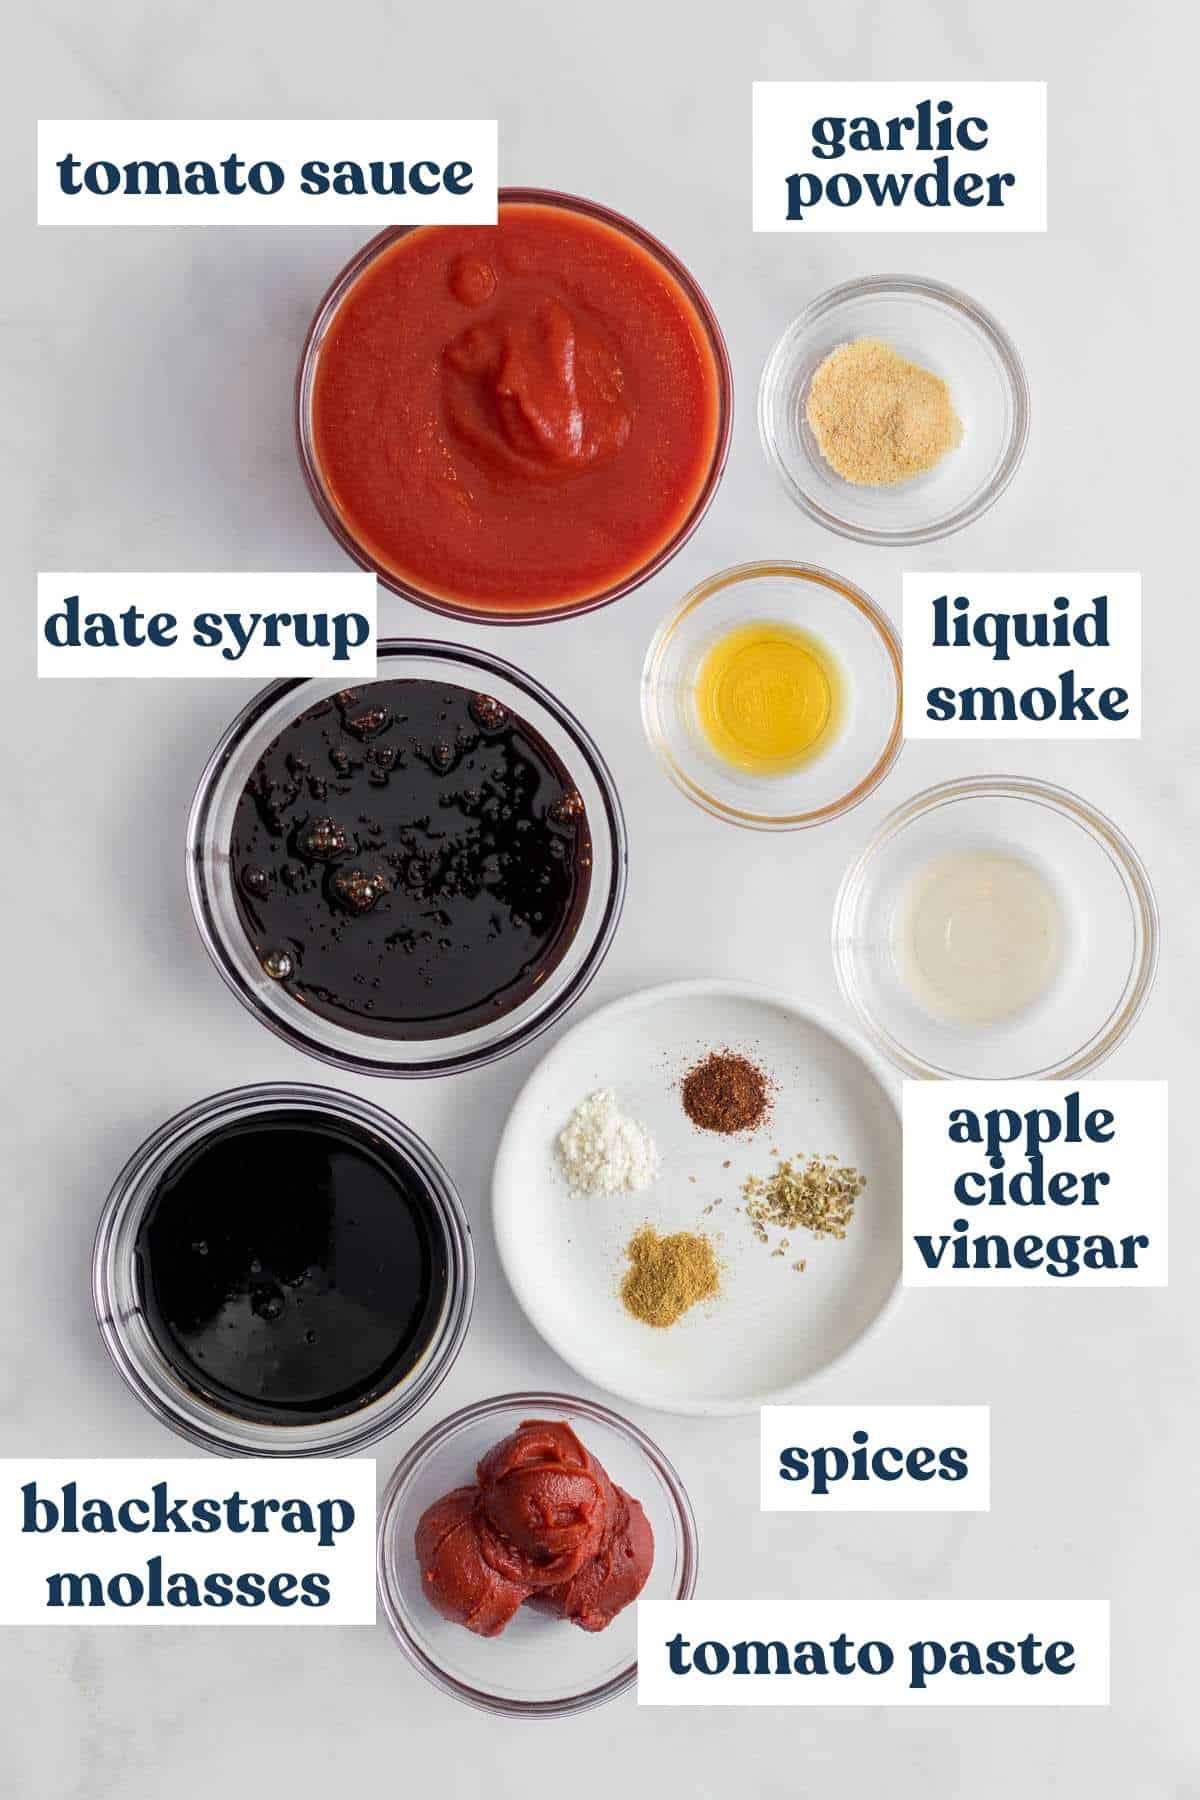 Ingredients needed for BBQ sauce measured and labeled.